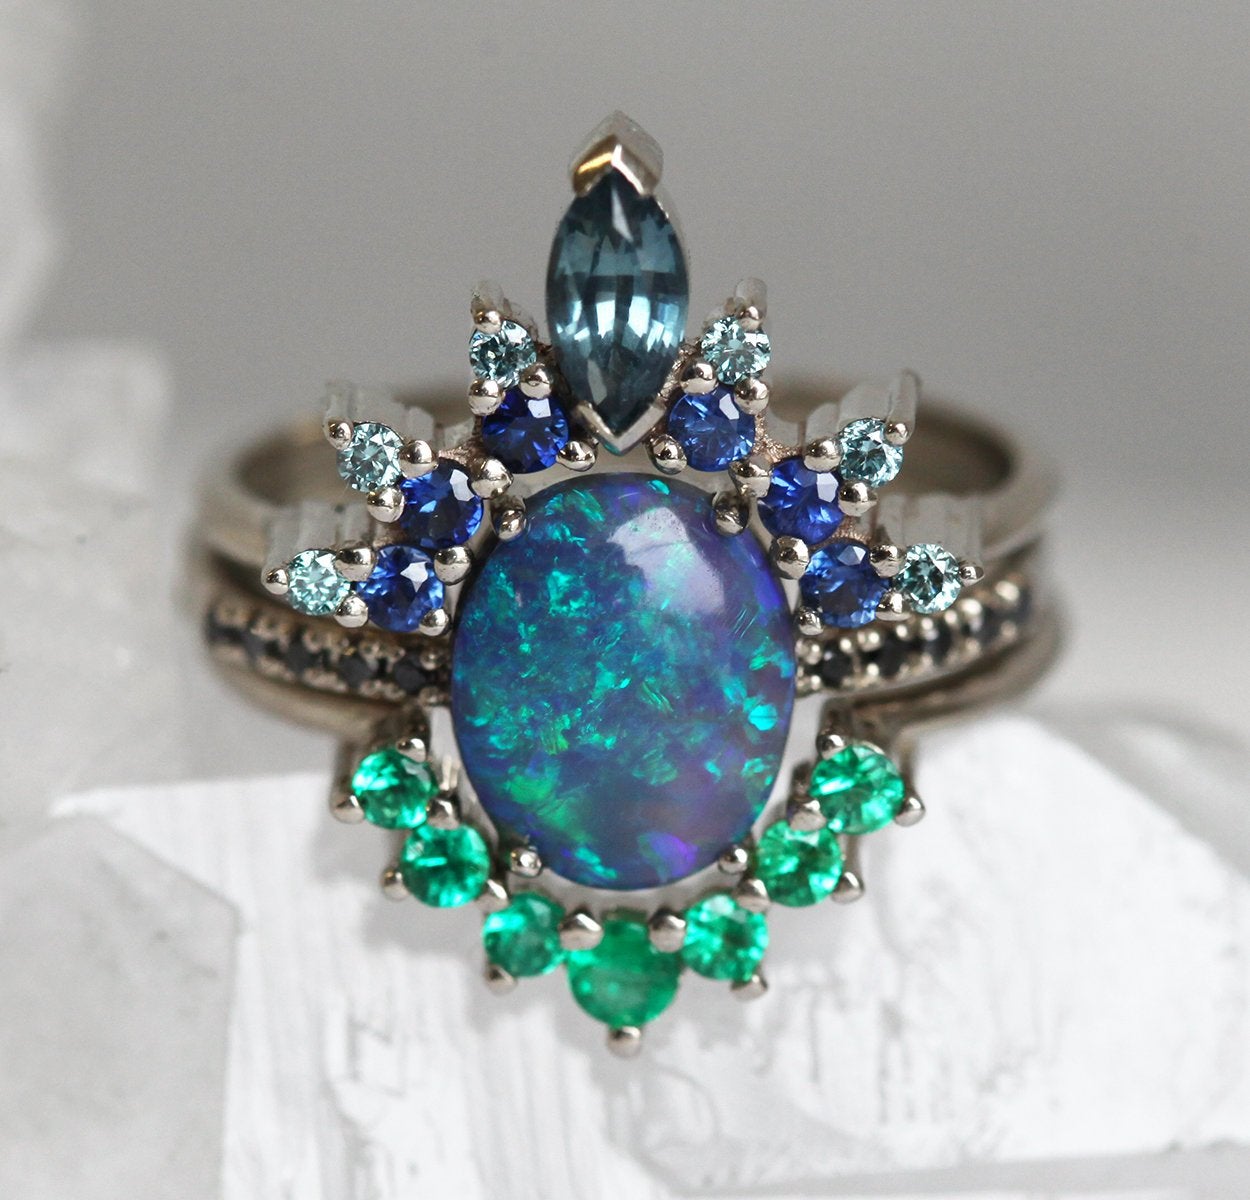 Black Lagoon Oval Opal Engagement Ring Set with Black and White Diamonds, Tourmaline, Emerald and Sapphire Gemstones 